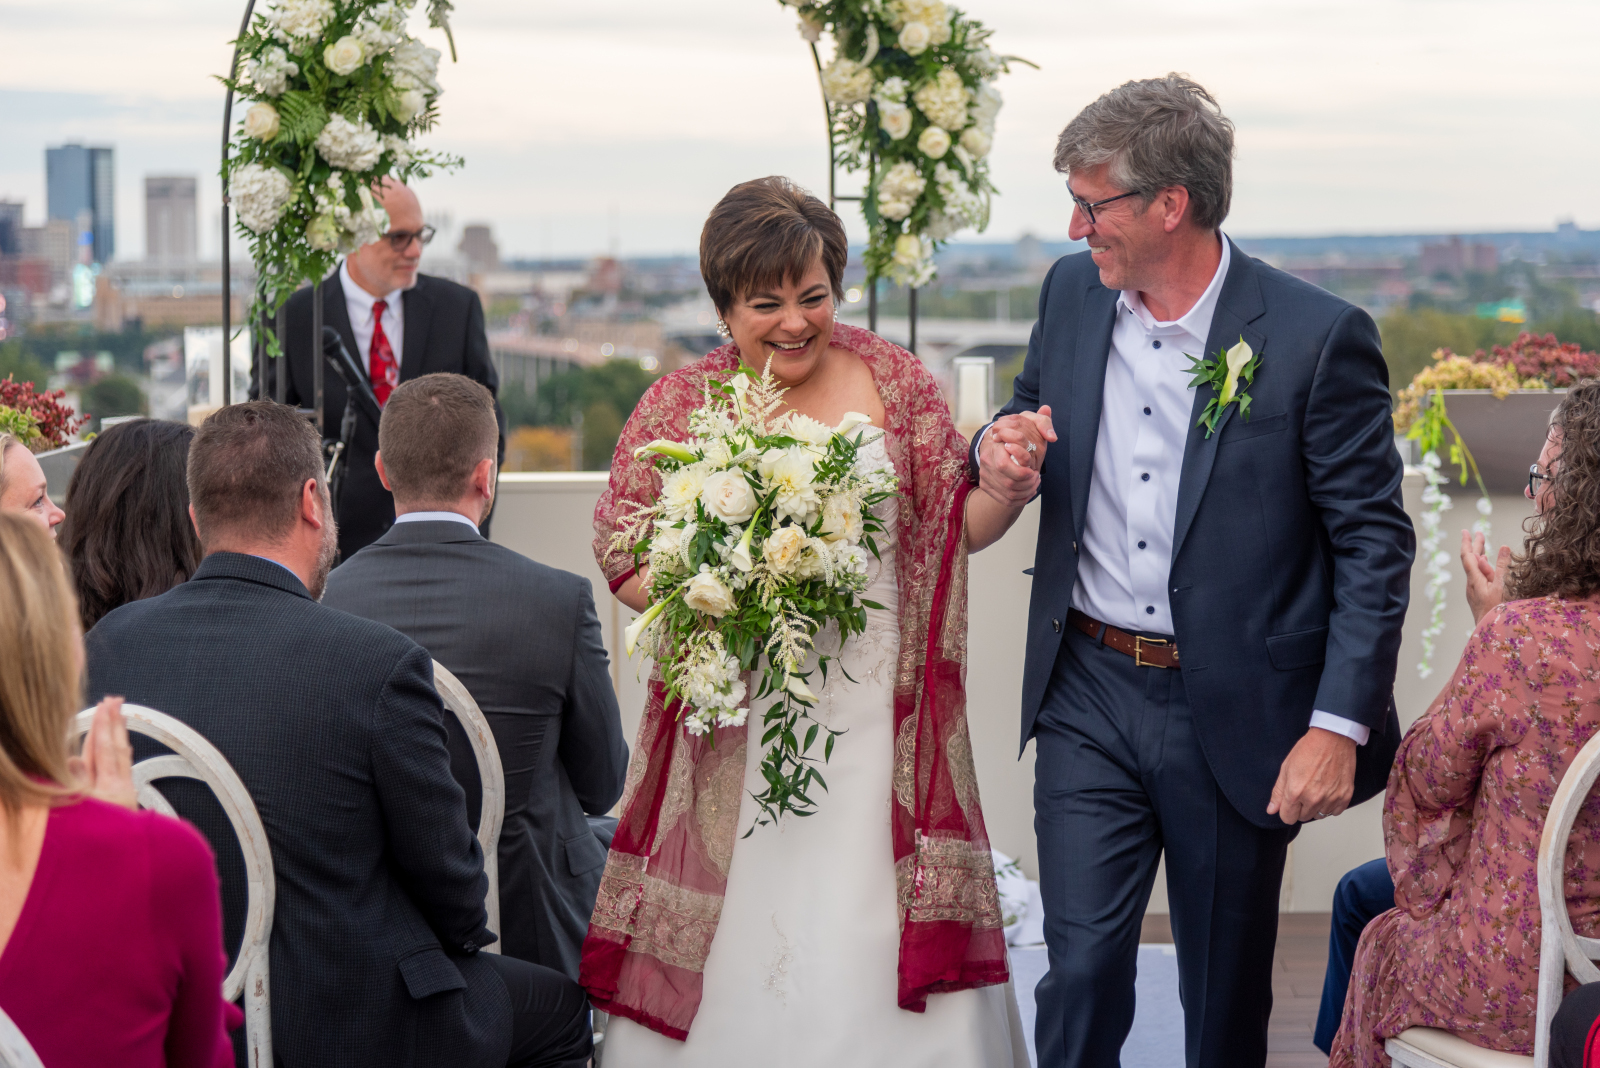 Bride and groom walking down the aisle, bridal recessional, wedding ceremony, smiling, laughing, sweet, cute, older couple, romantic outdoor urban wedding ceremony at Penthouse Events, Ohio City, Cleveland Flats, downtown Cleveland skyline